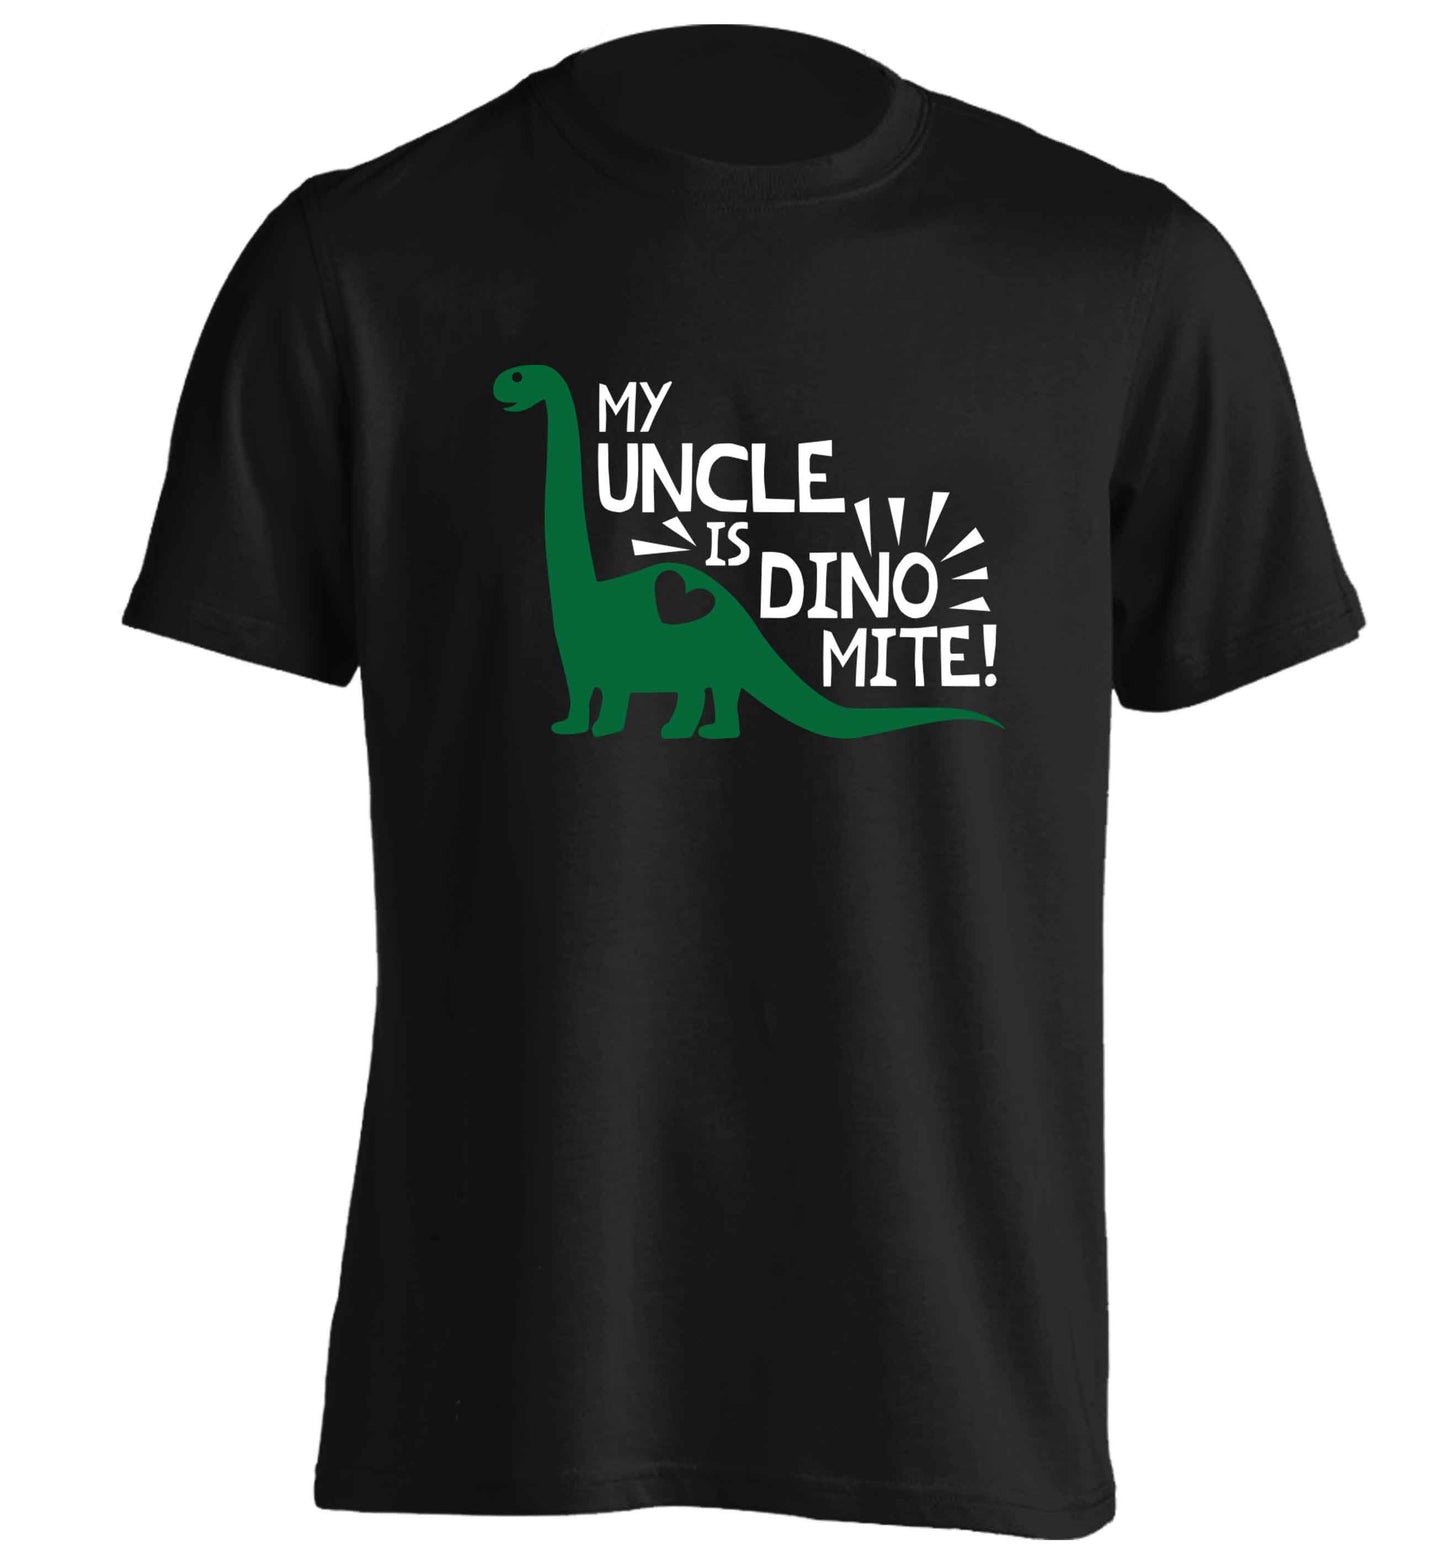 My uncle is dinomite! adults unisex black Tshirt 2XL